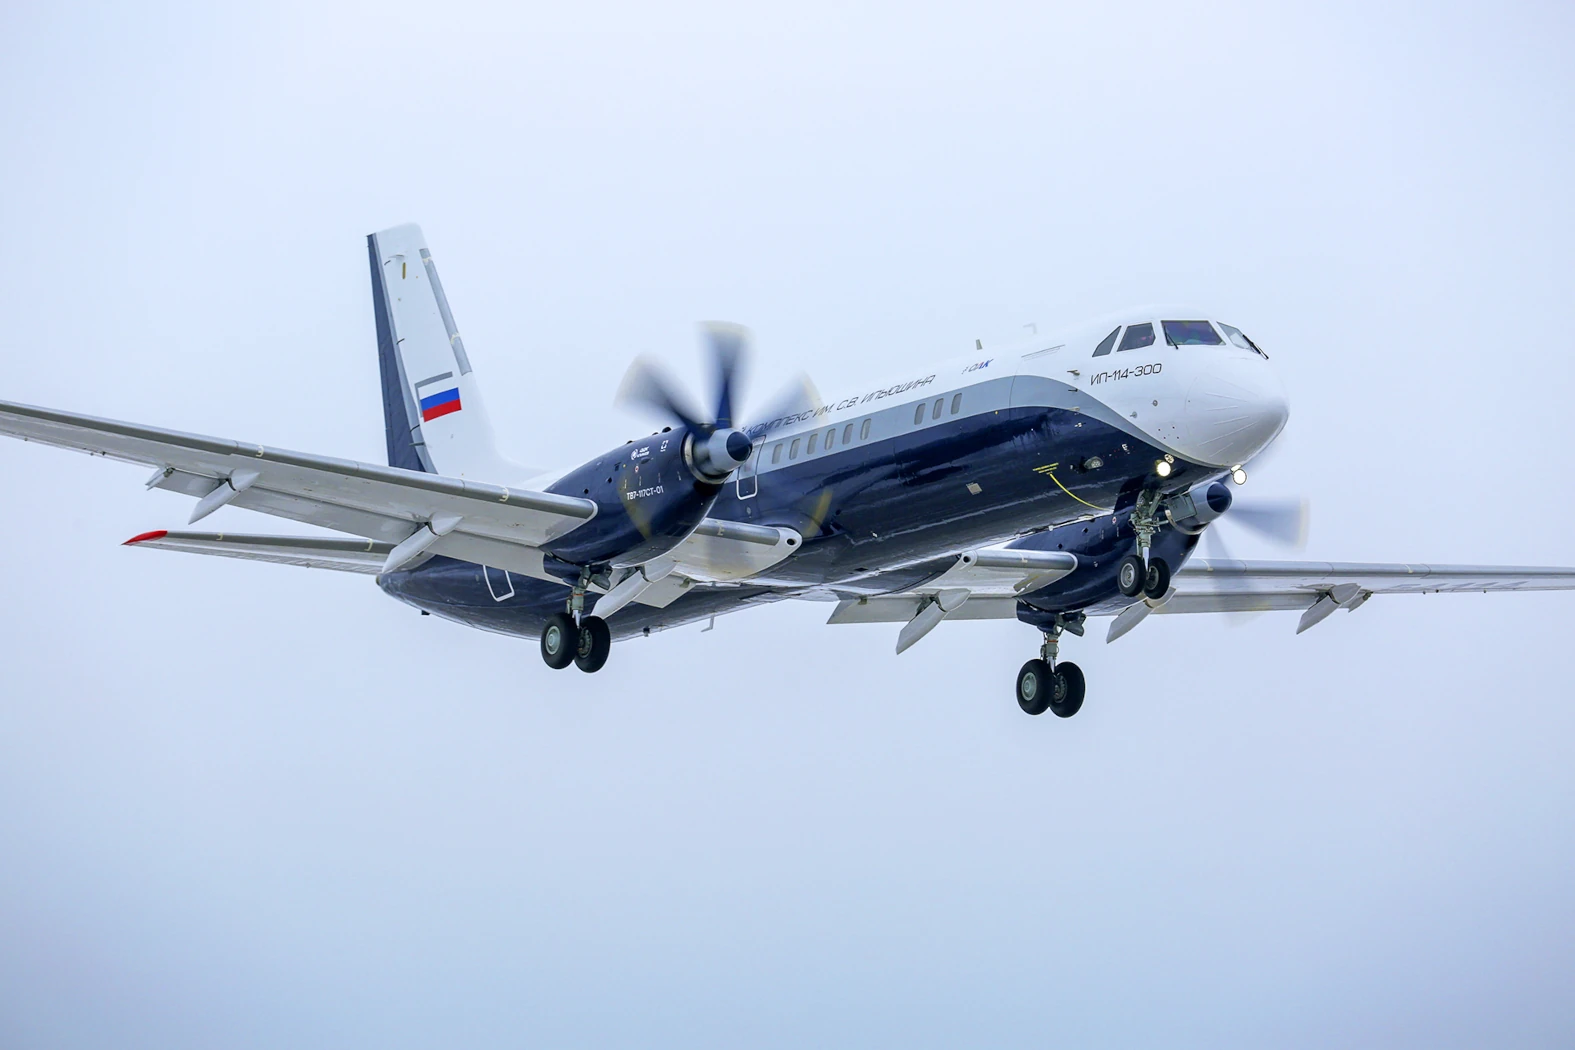 Tupolev, Antonov, Yakovlev, Sukhoi and Ilyushin are set to replace Boeing and Airbus in Russia